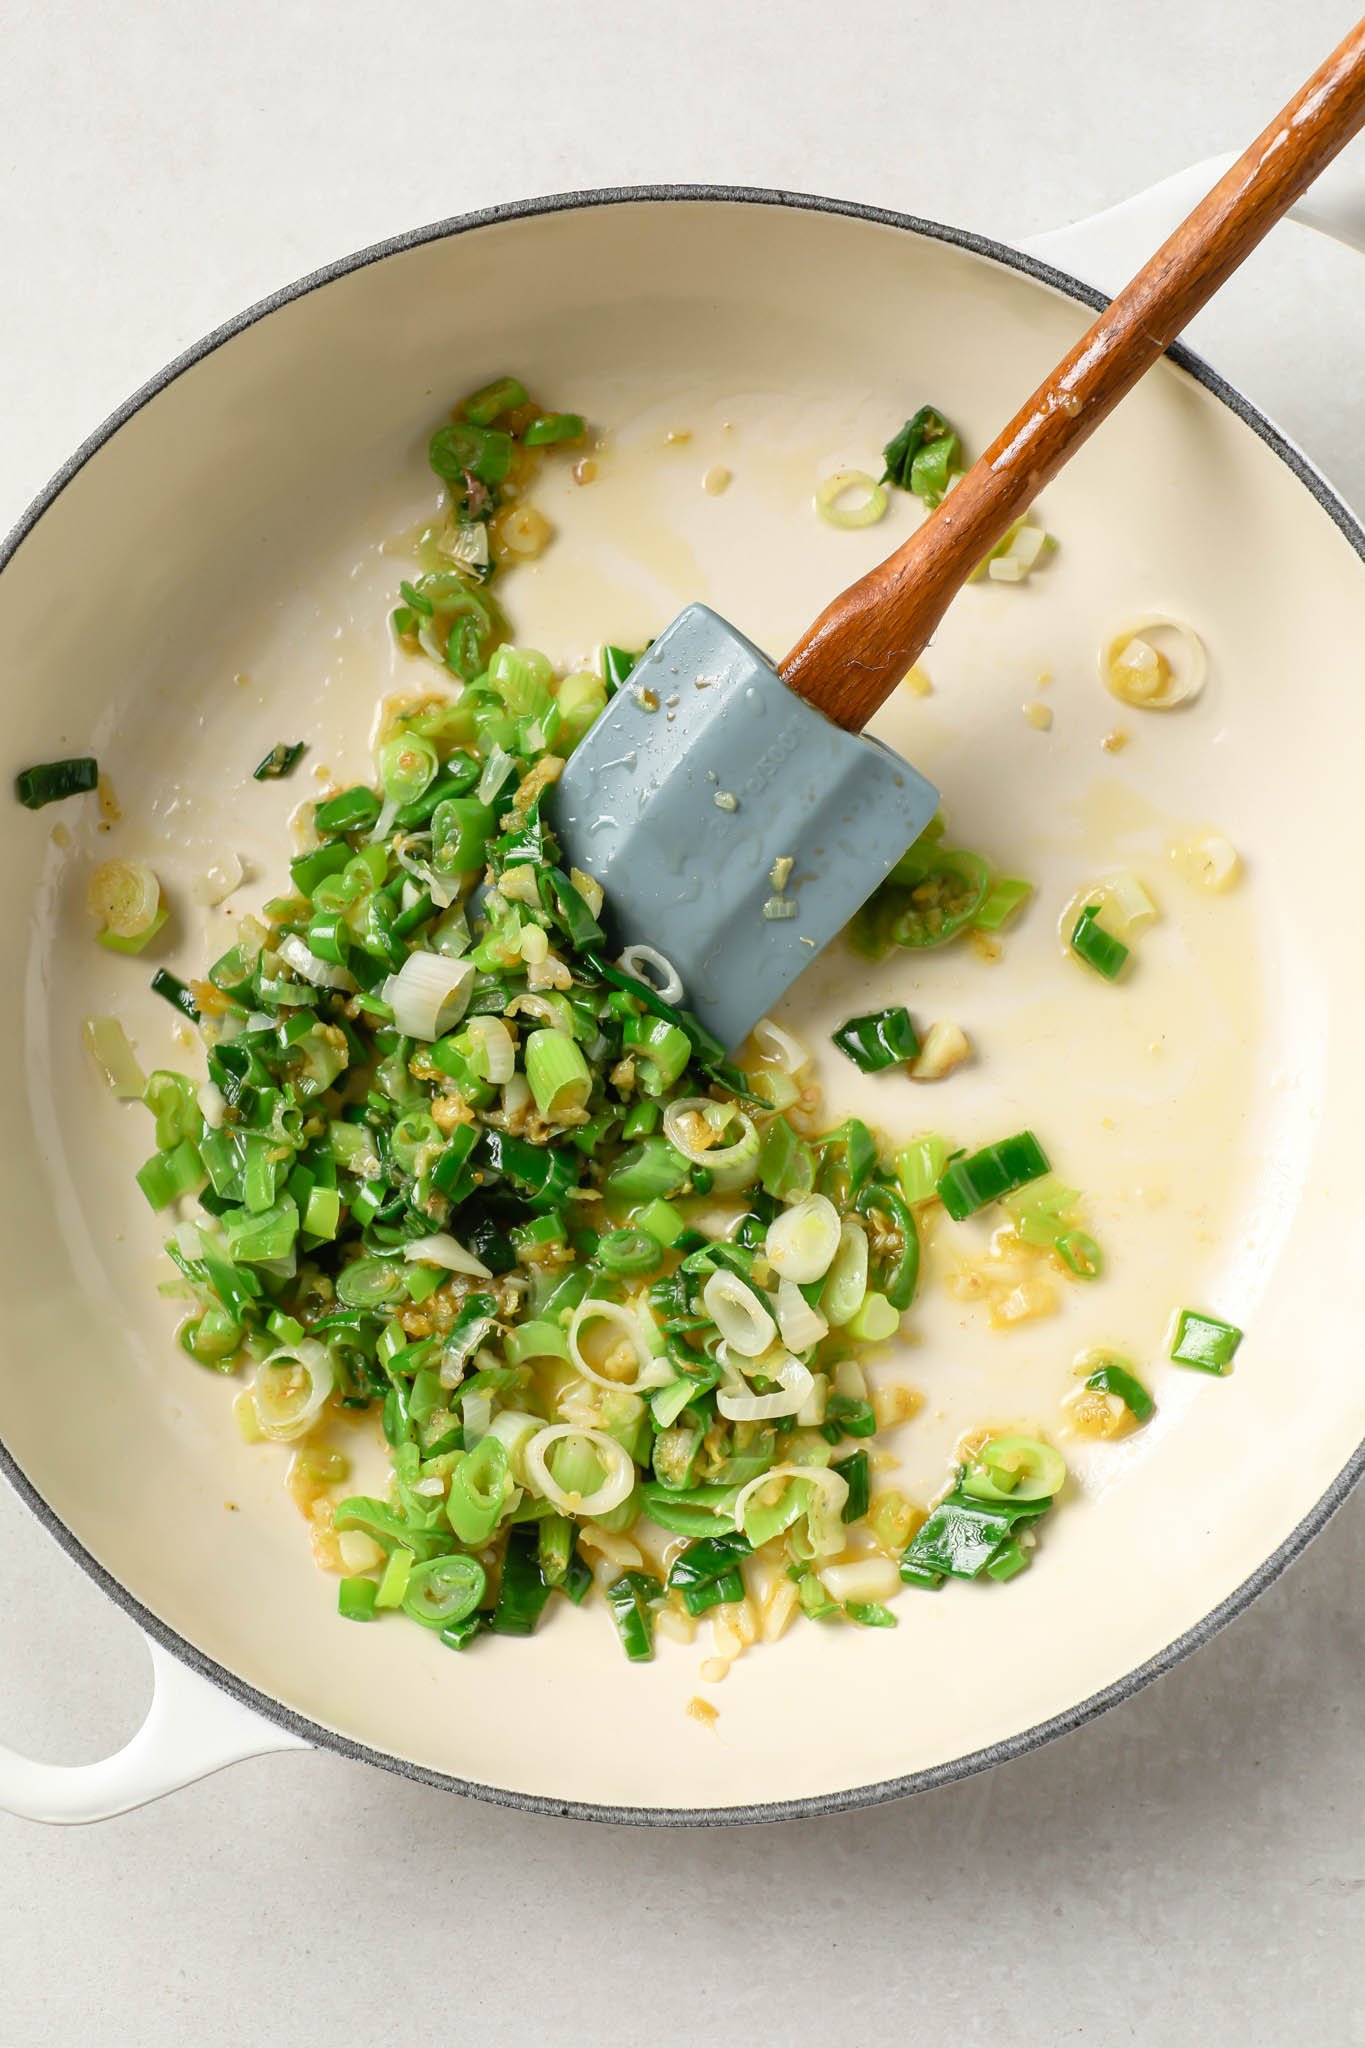 Sautéed green onions in a pot with a rubber spatula.